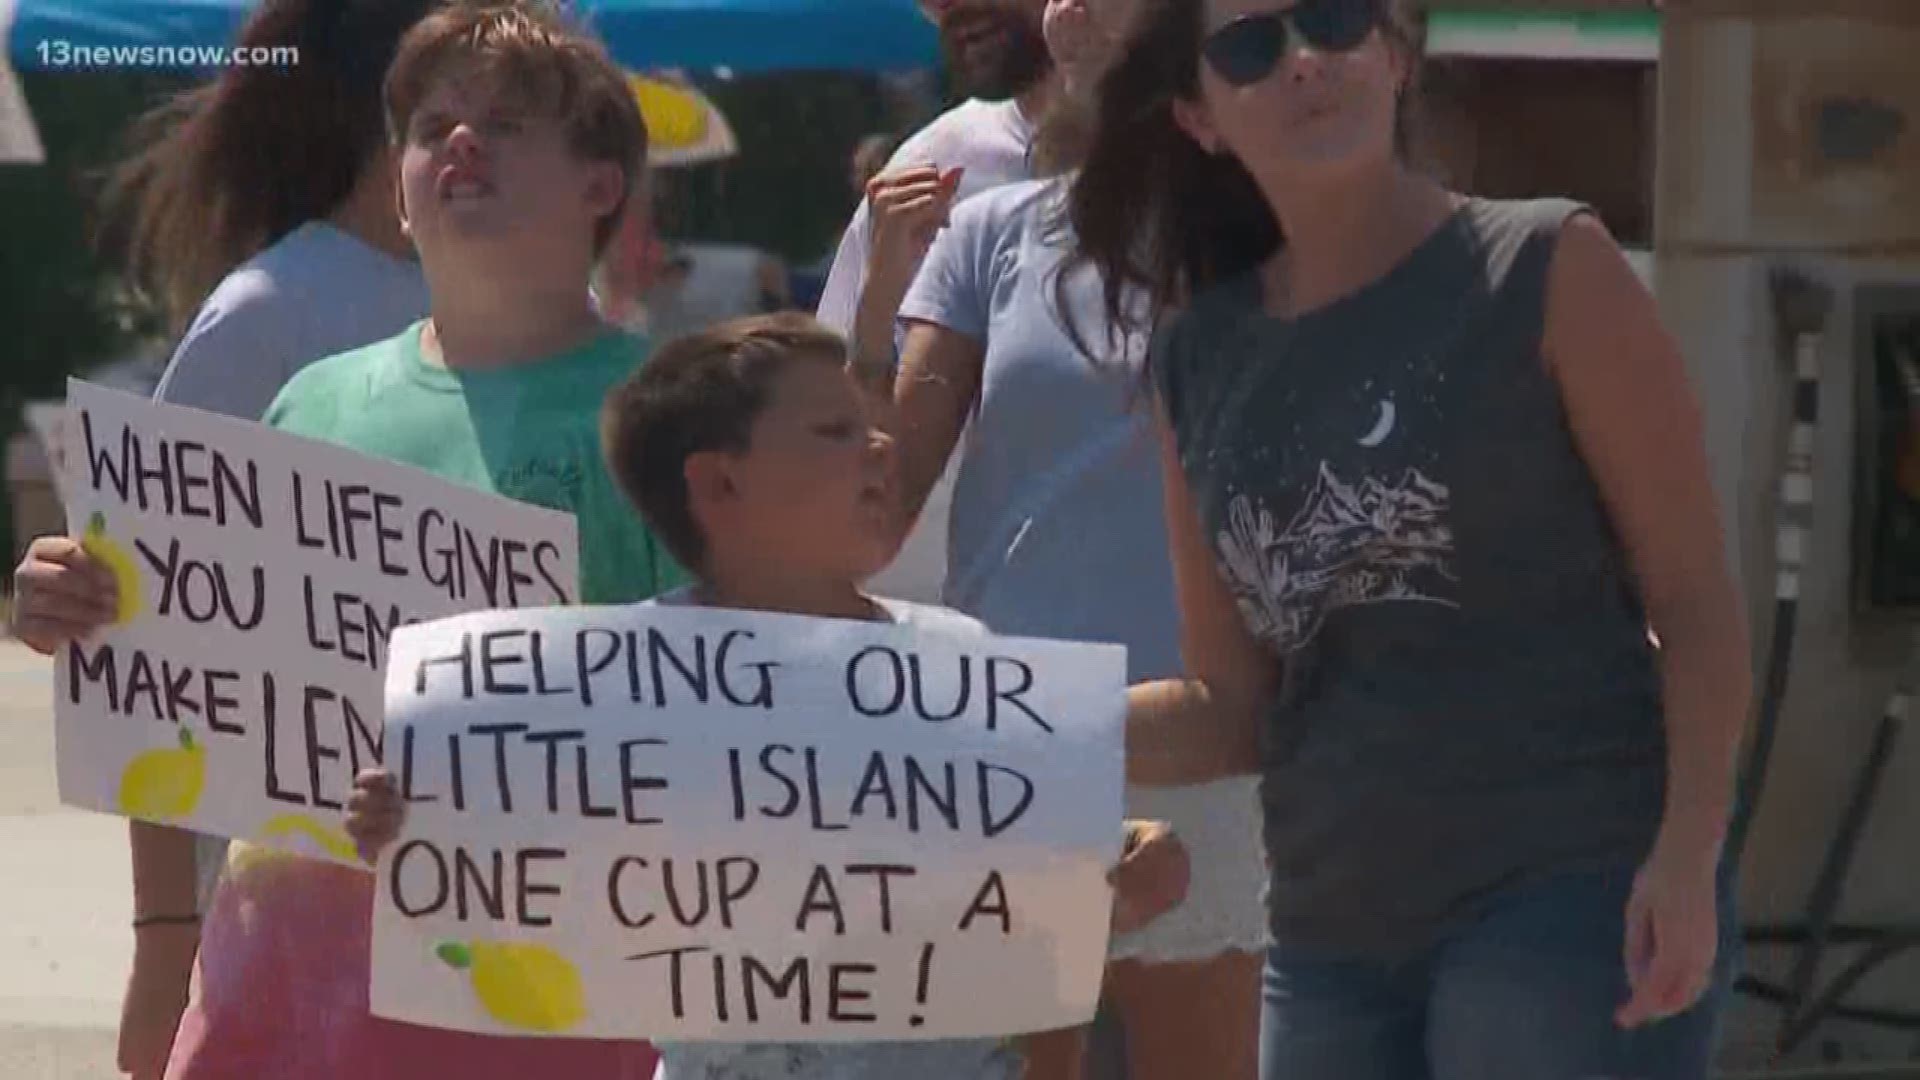 No matter their age, everyone is participating in the rebuilding process of Hatteras after Hurricane Dorian tore through the area. Young students were chanting for donations to save their schools and their home.